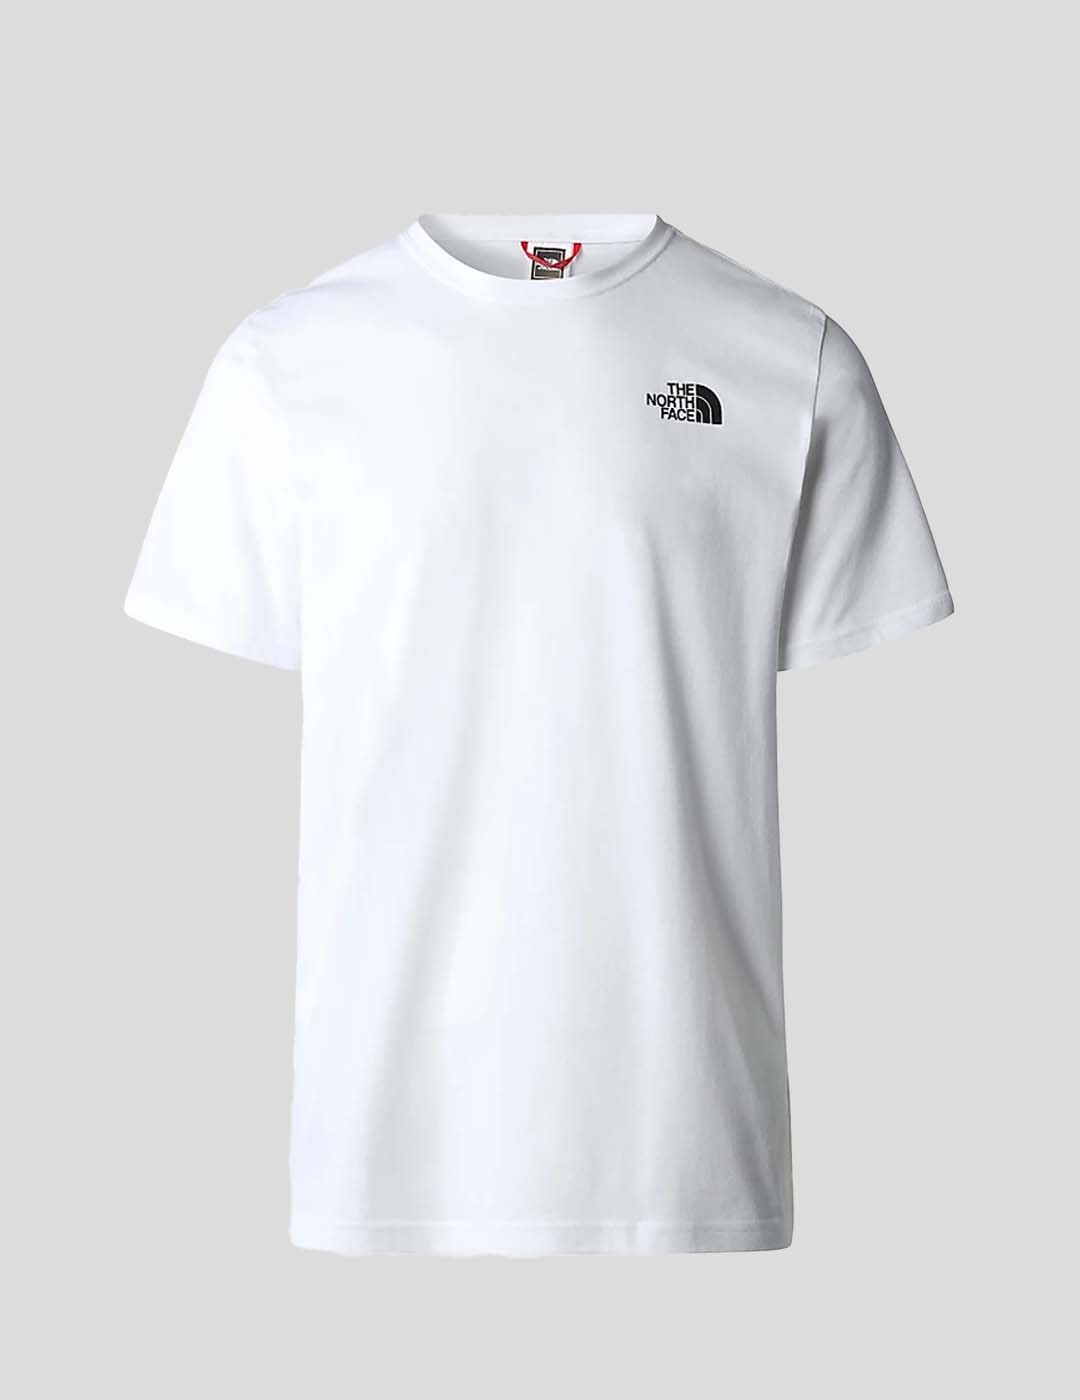 CAMISETA THE NORTH FACE RED BOX TEE   TNF WHITE/GRADIENT PRINT